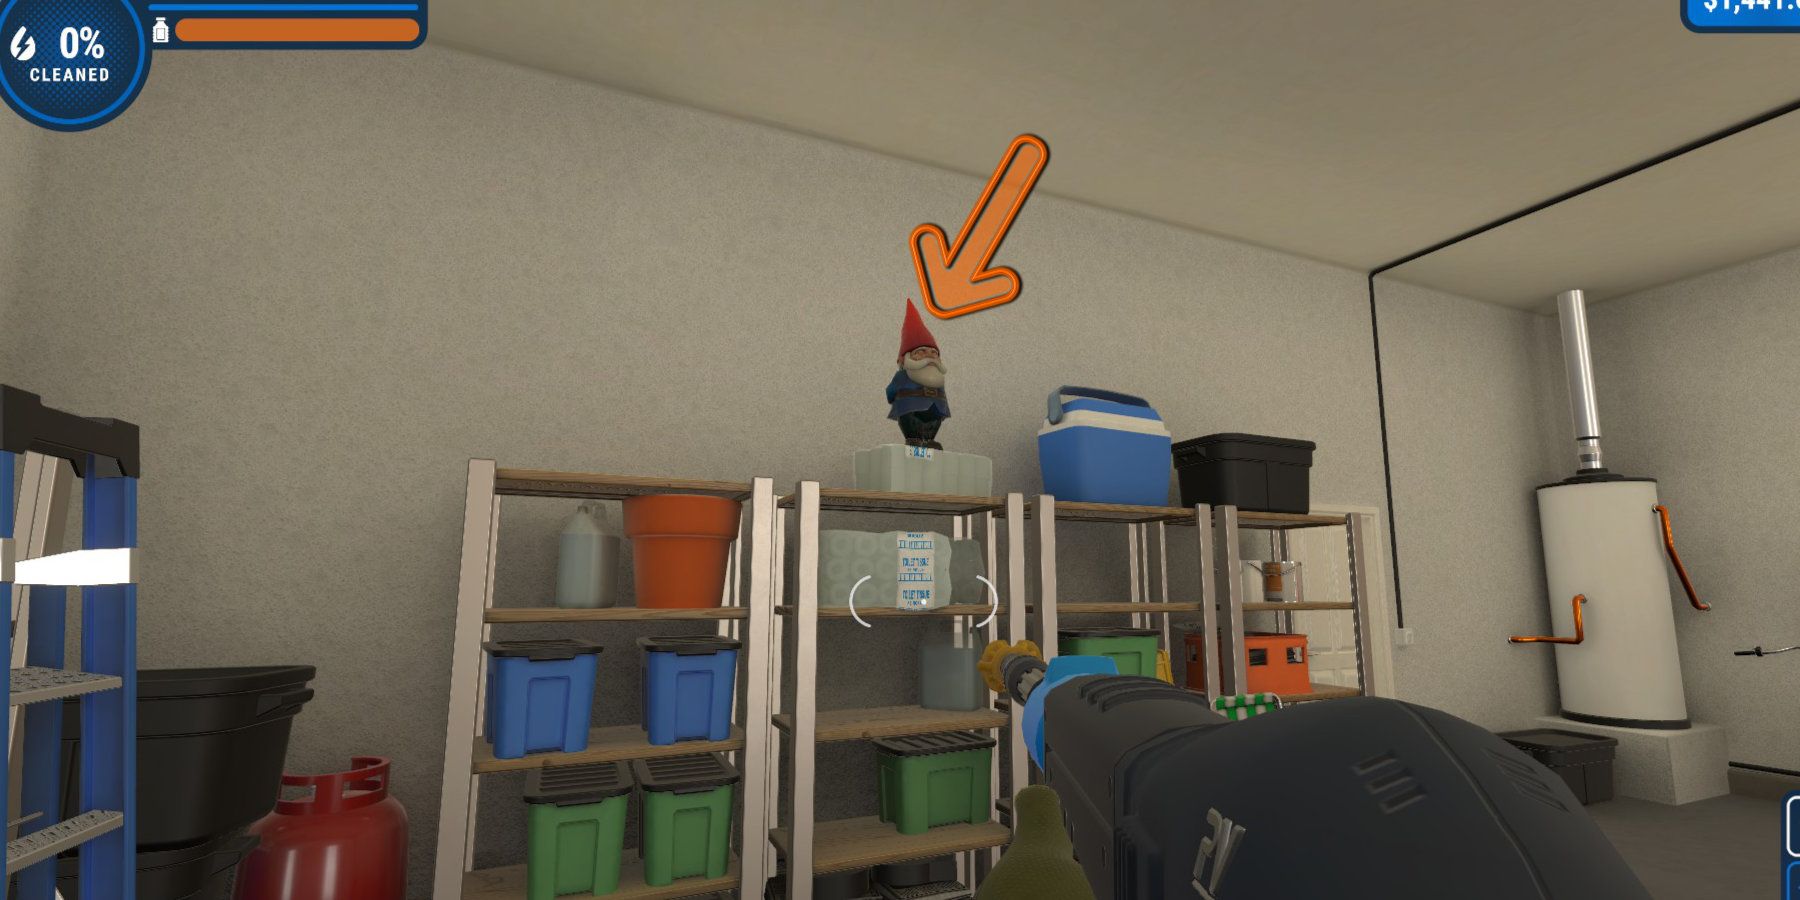 A garden gnome on top of some garage shelves, highlighted by an arrow.